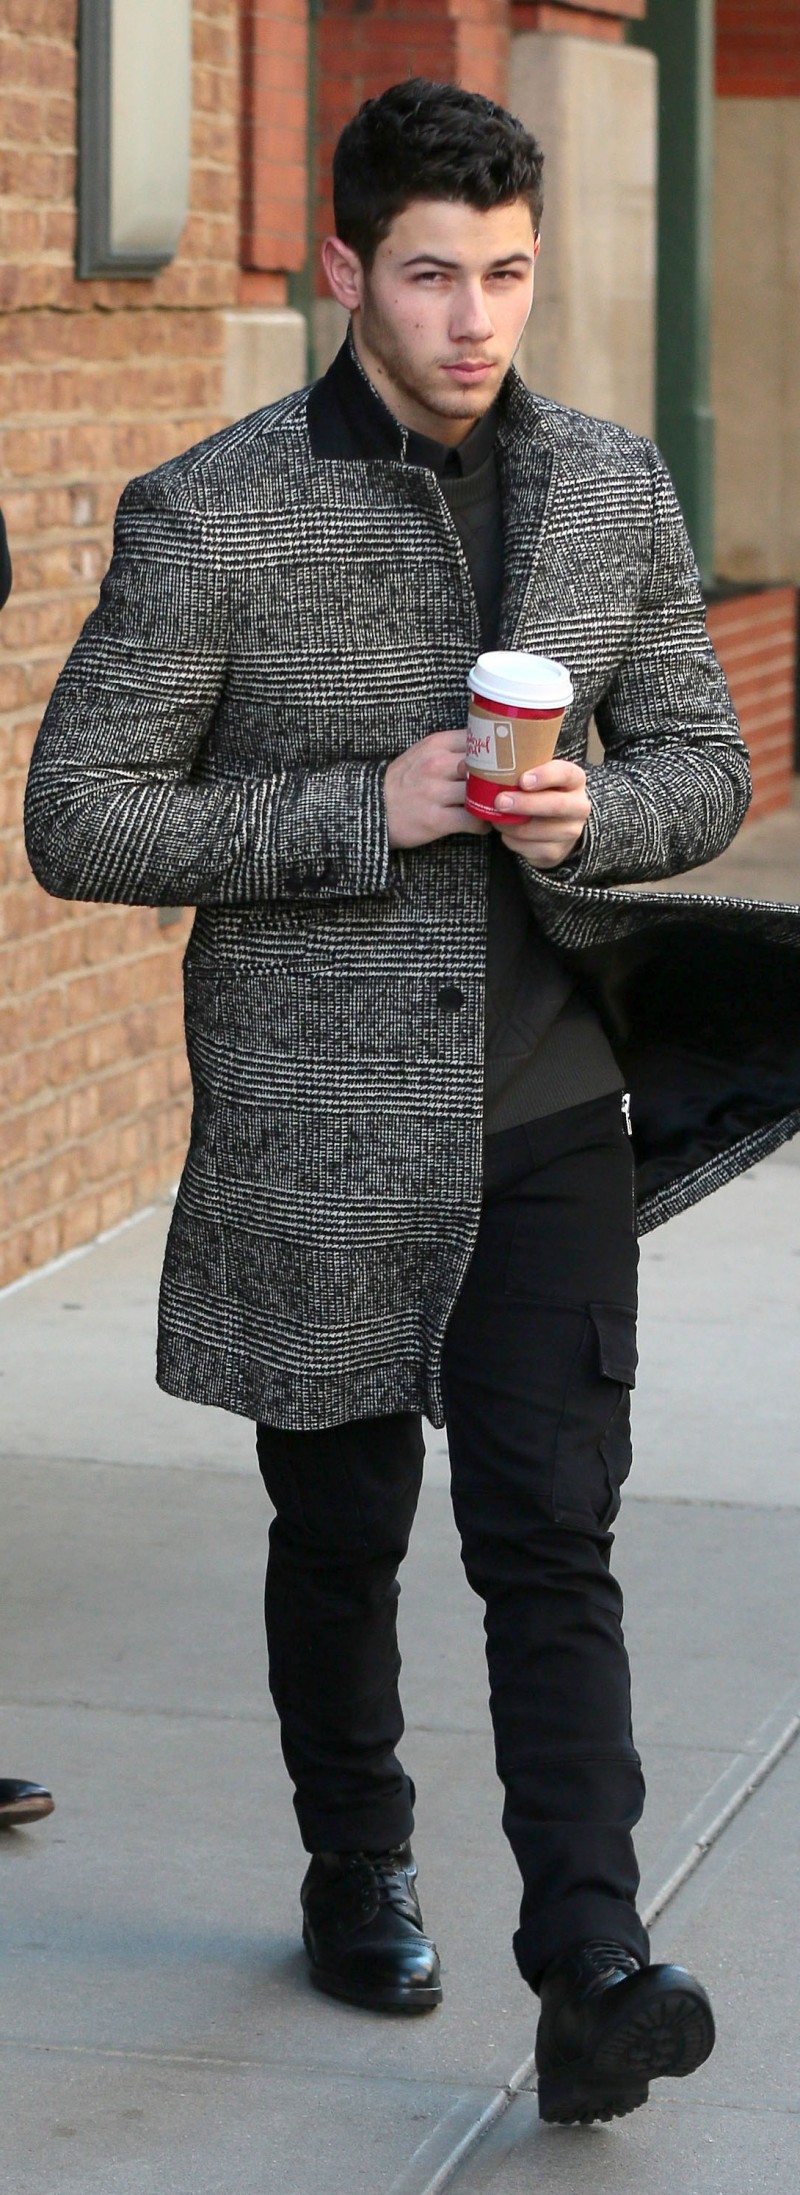 Currently promoting his self-titled album, Nick Jonas is out and about in New York City, where he was spotted on November 18th, bundling up in a coat from AMI. The tweed coat makes quite the sartorial statement with its smart black & white checks.